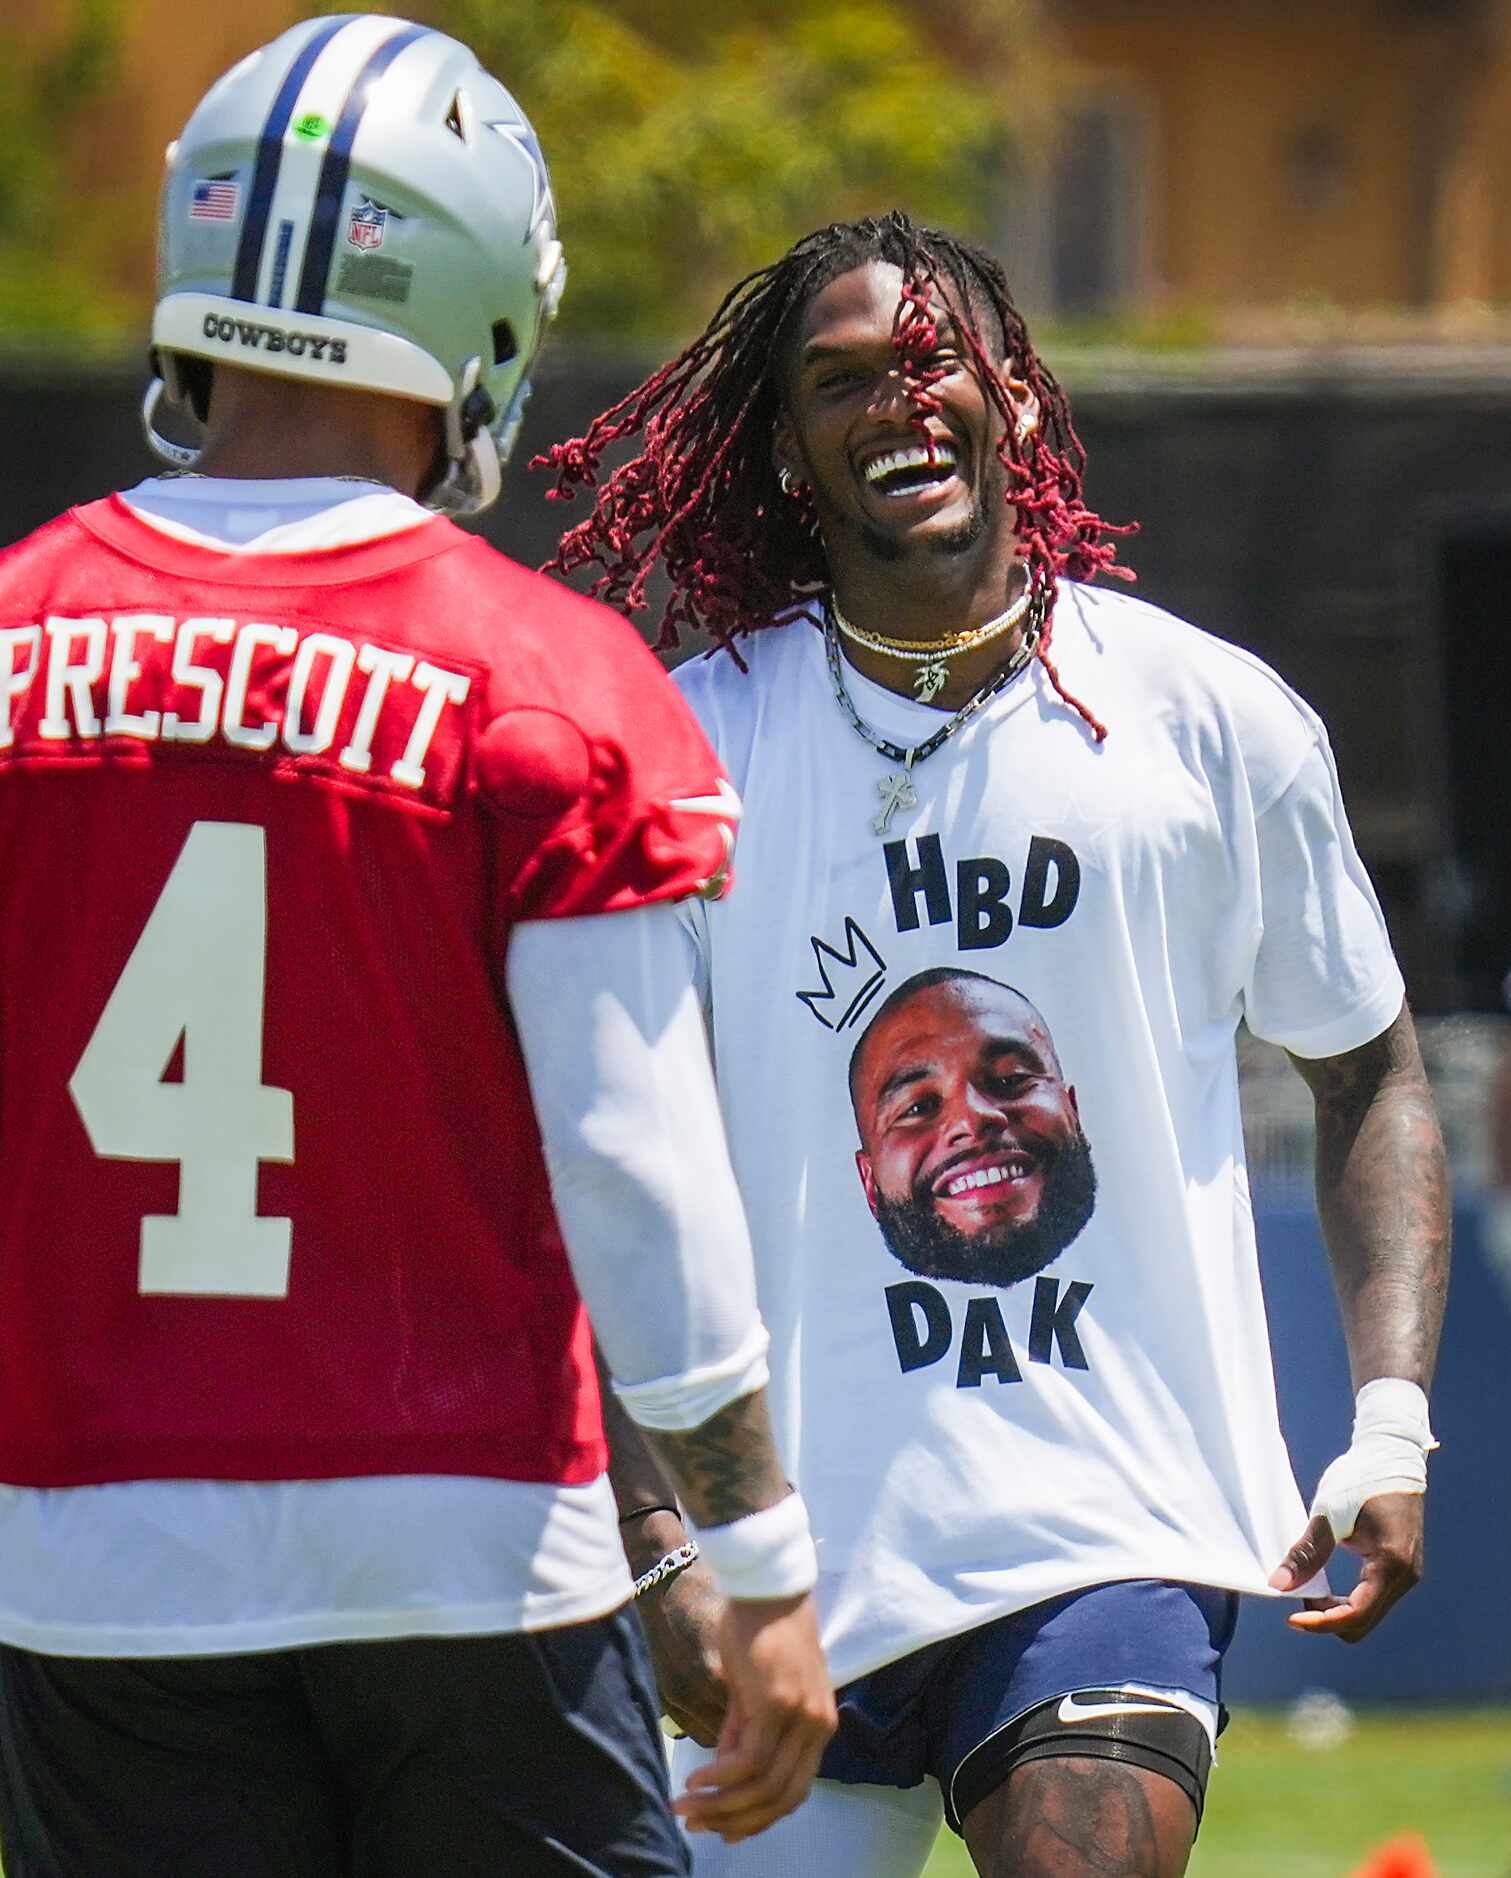 Dallas Cowboys wide receiver CeeDee Lamb (88) shows off a t-shirt reading “HBD Dak” to...